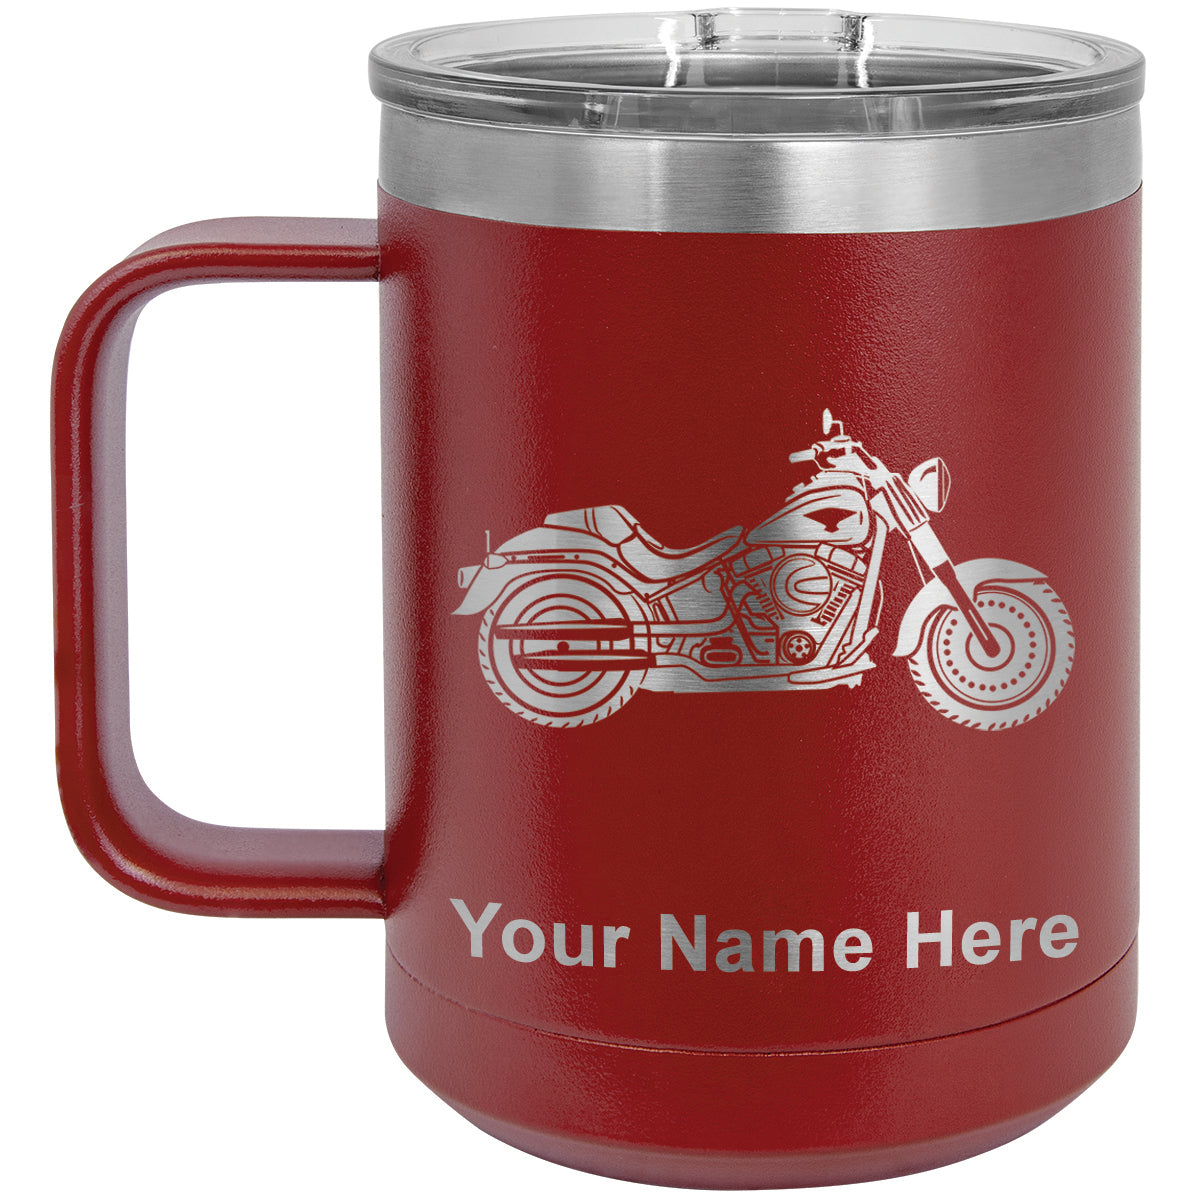 15oz Vacuum Insulated Coffee Mug, Motorcycle, Personalized Engraving Included